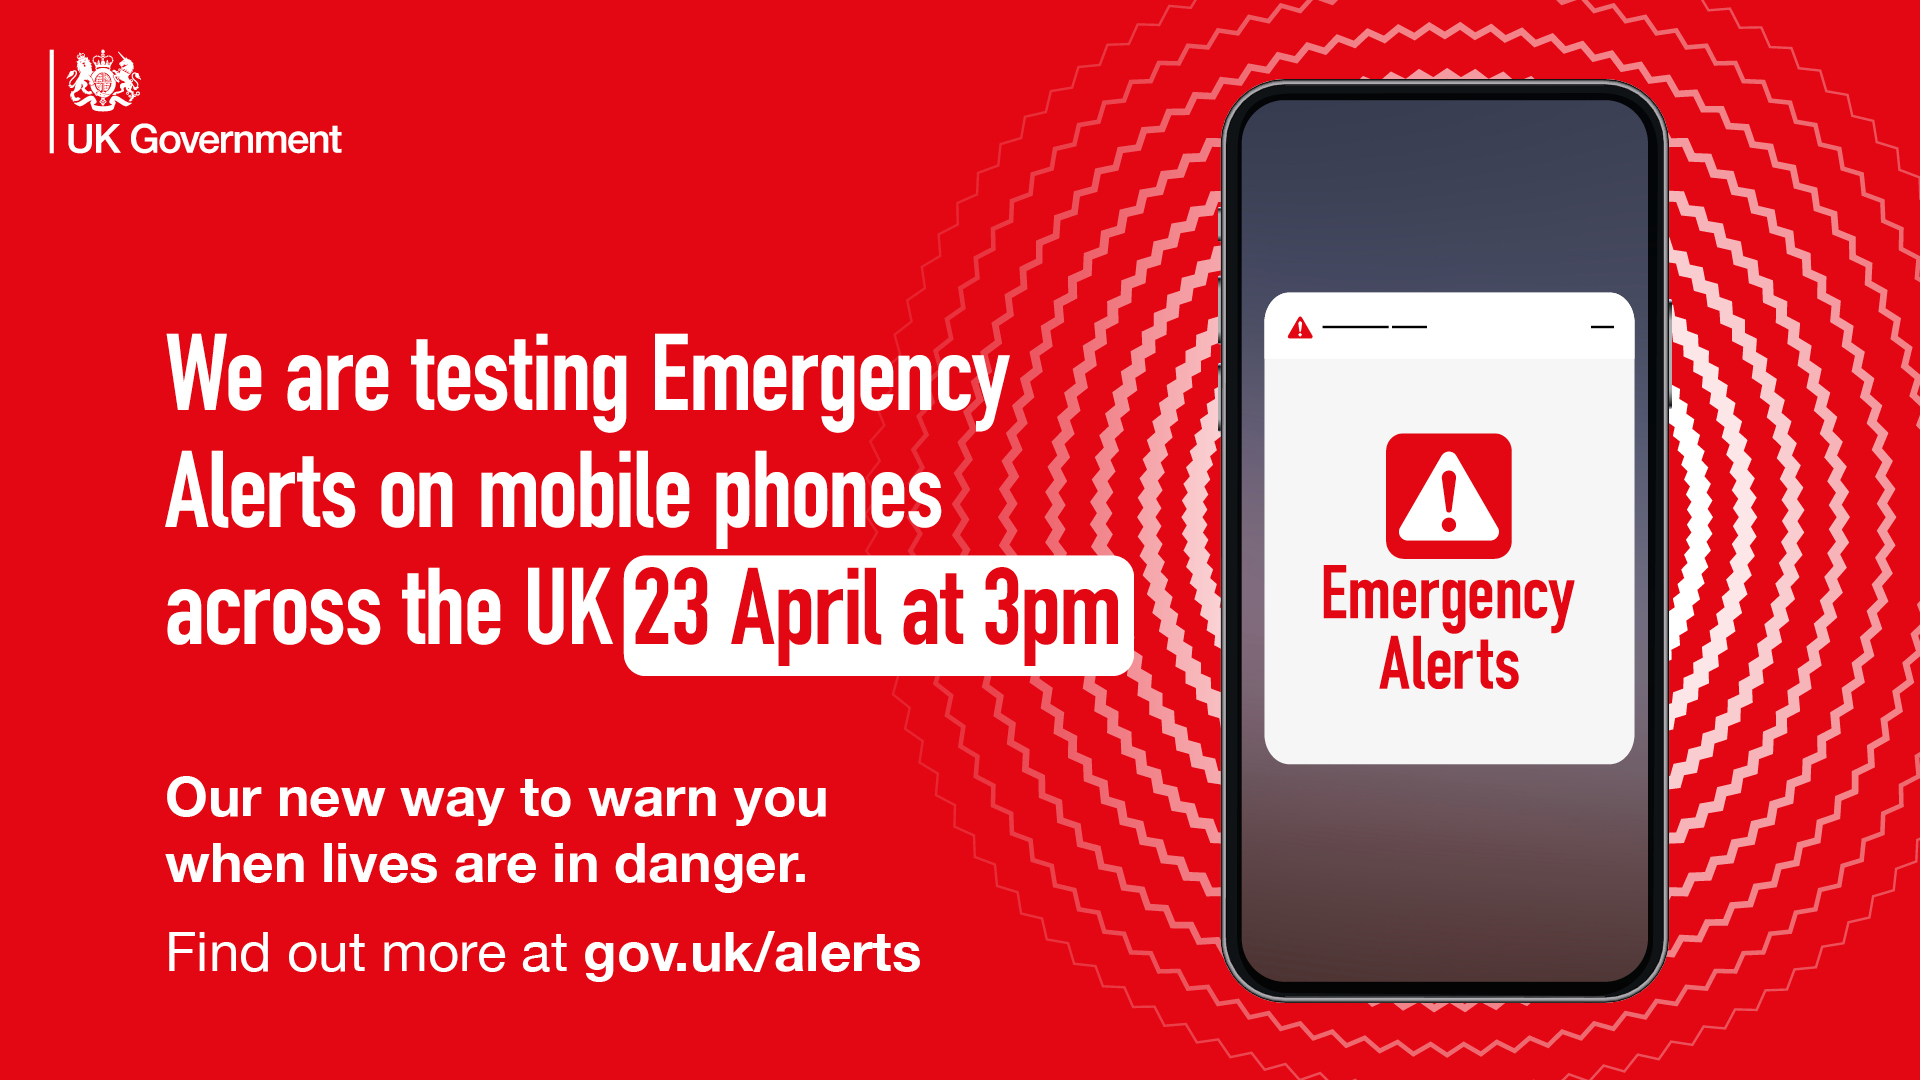 Red background showing a mobile phone that says emergency alerts in red text